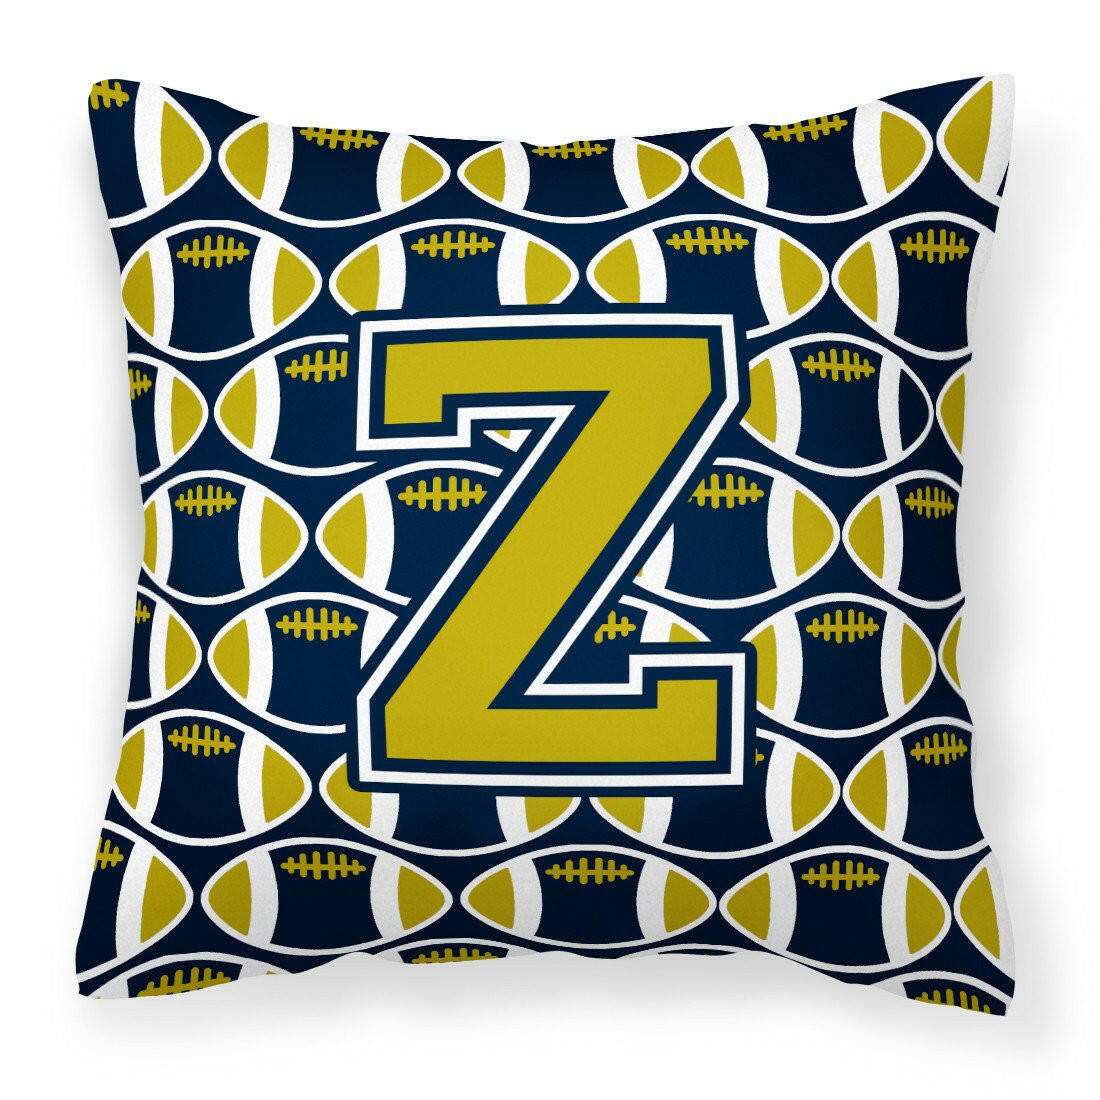 Letter Z Football Blue and Gold Fabric Decorative Pillow CJ1074-ZPW1414 by Caroline's Treasures